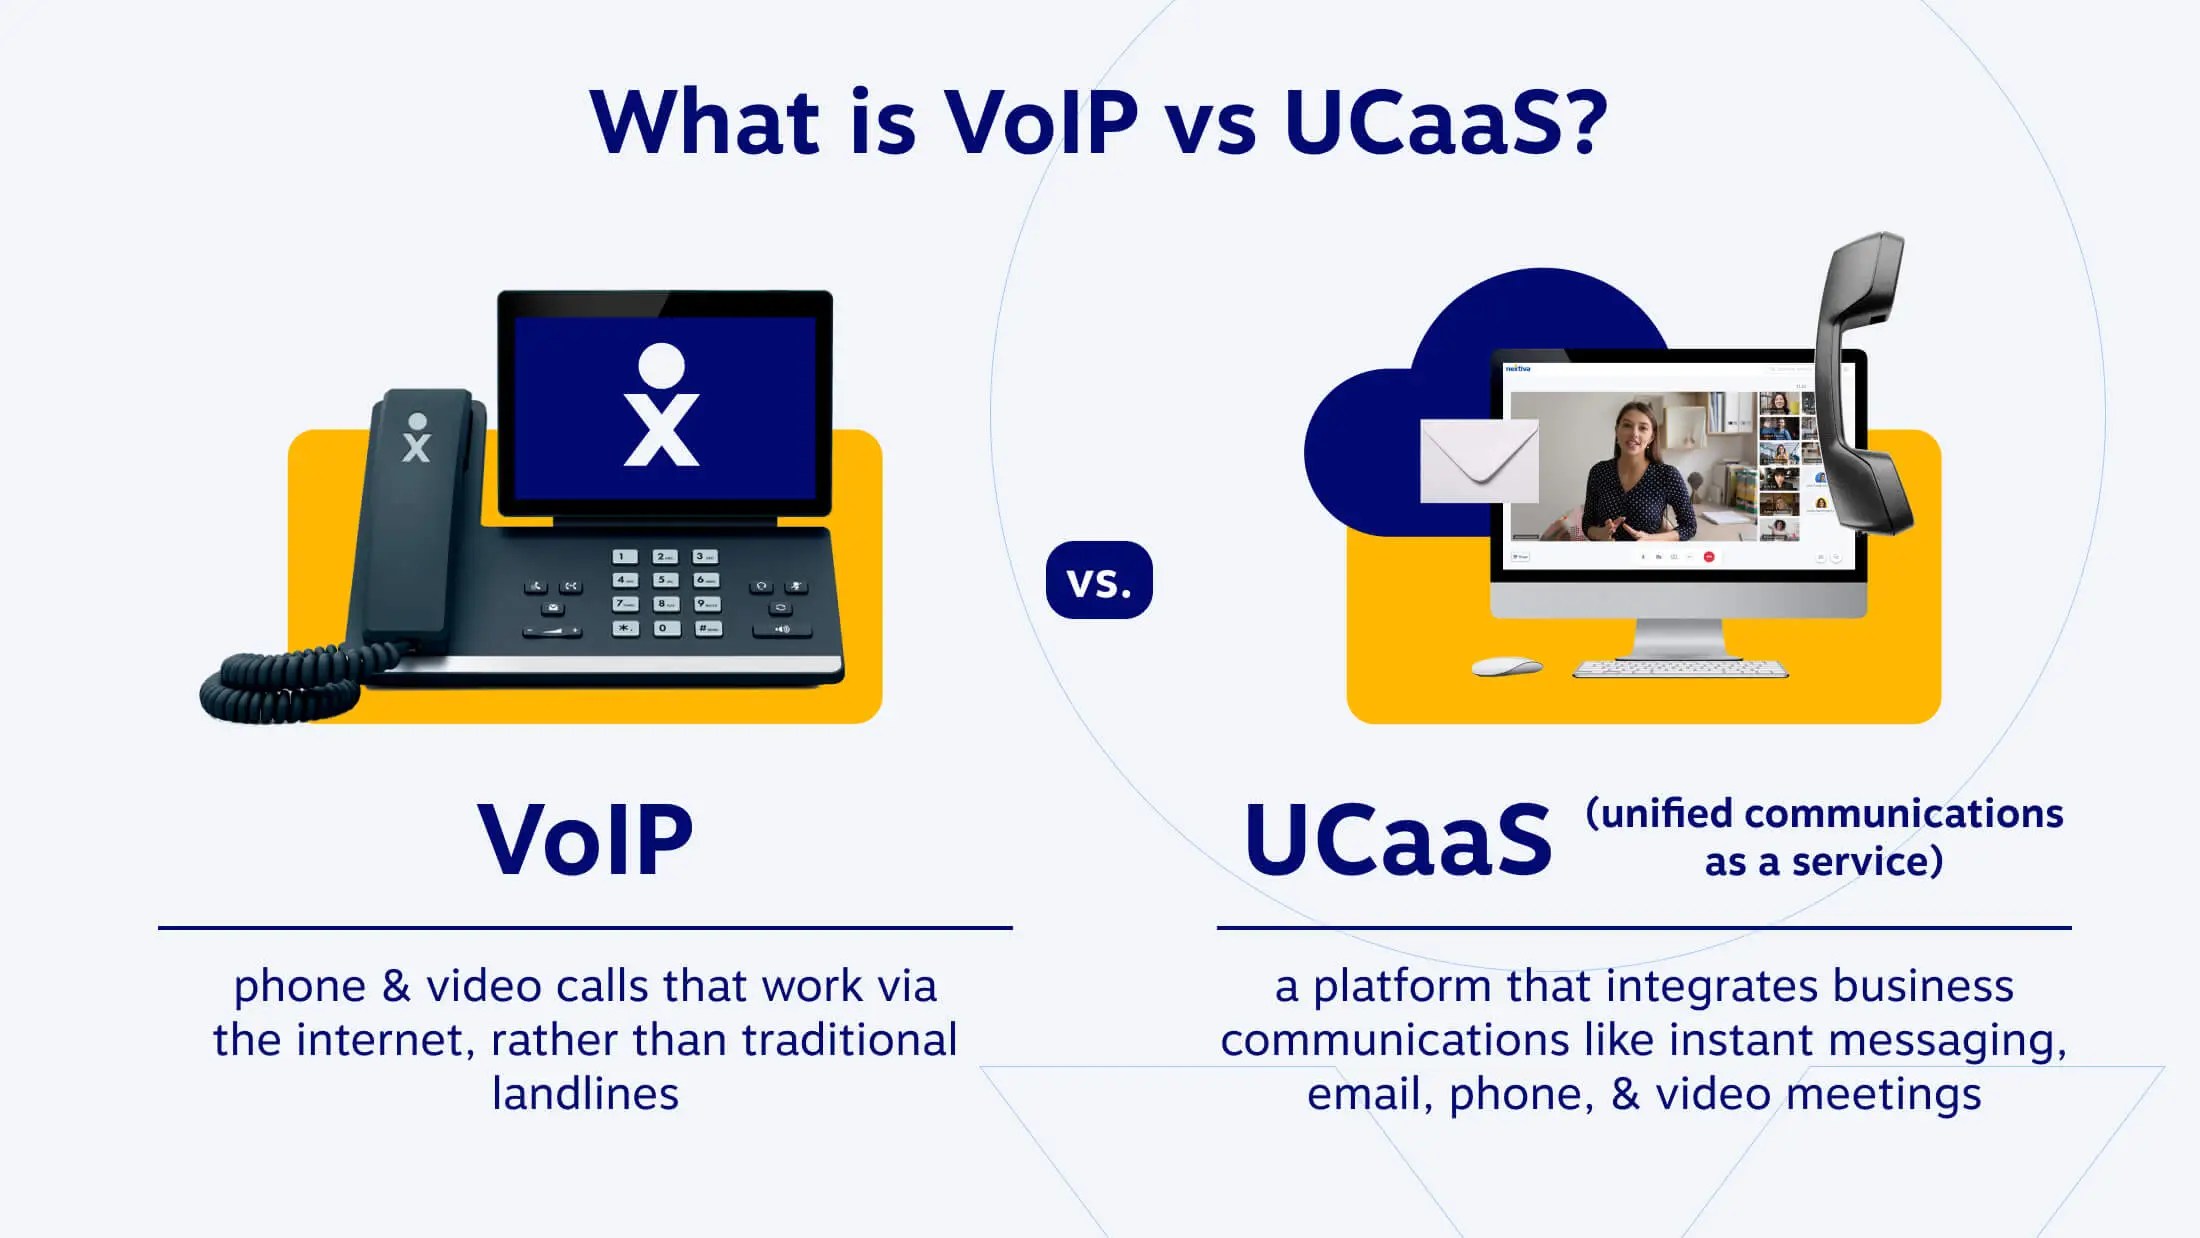 Key differences between VoIP and UCaaS